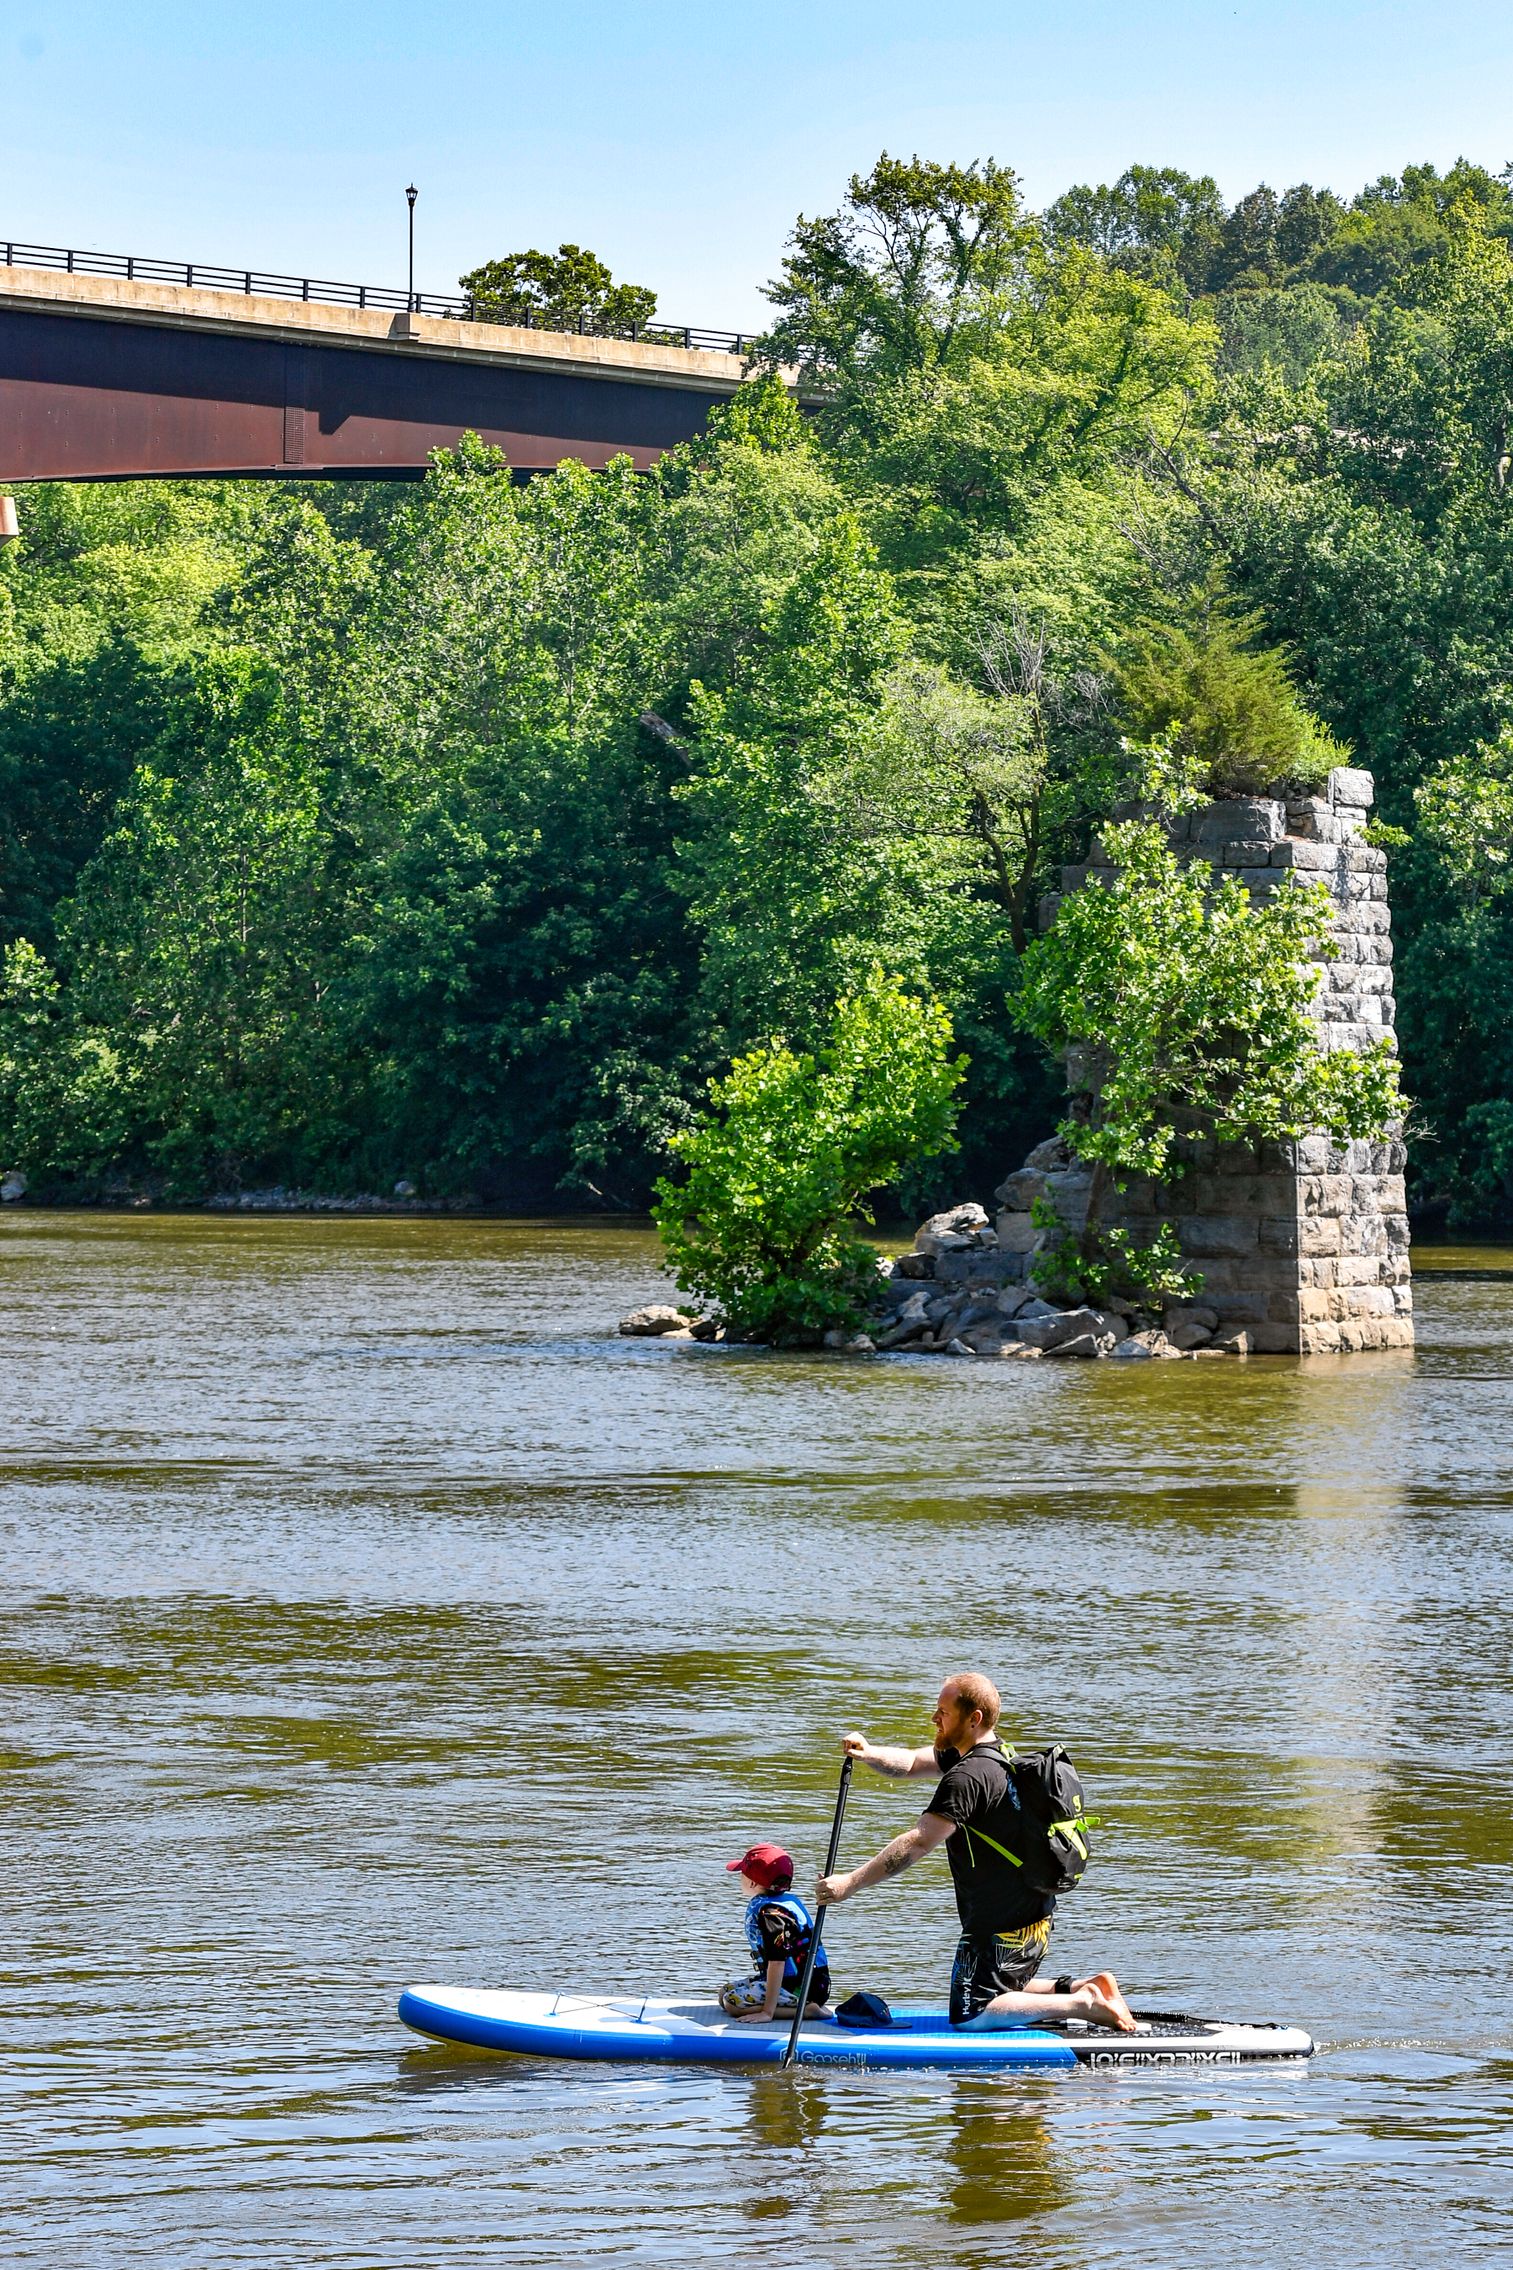 An adult and child paddle board in a river past an old brick bridge support near Shepherdstown.